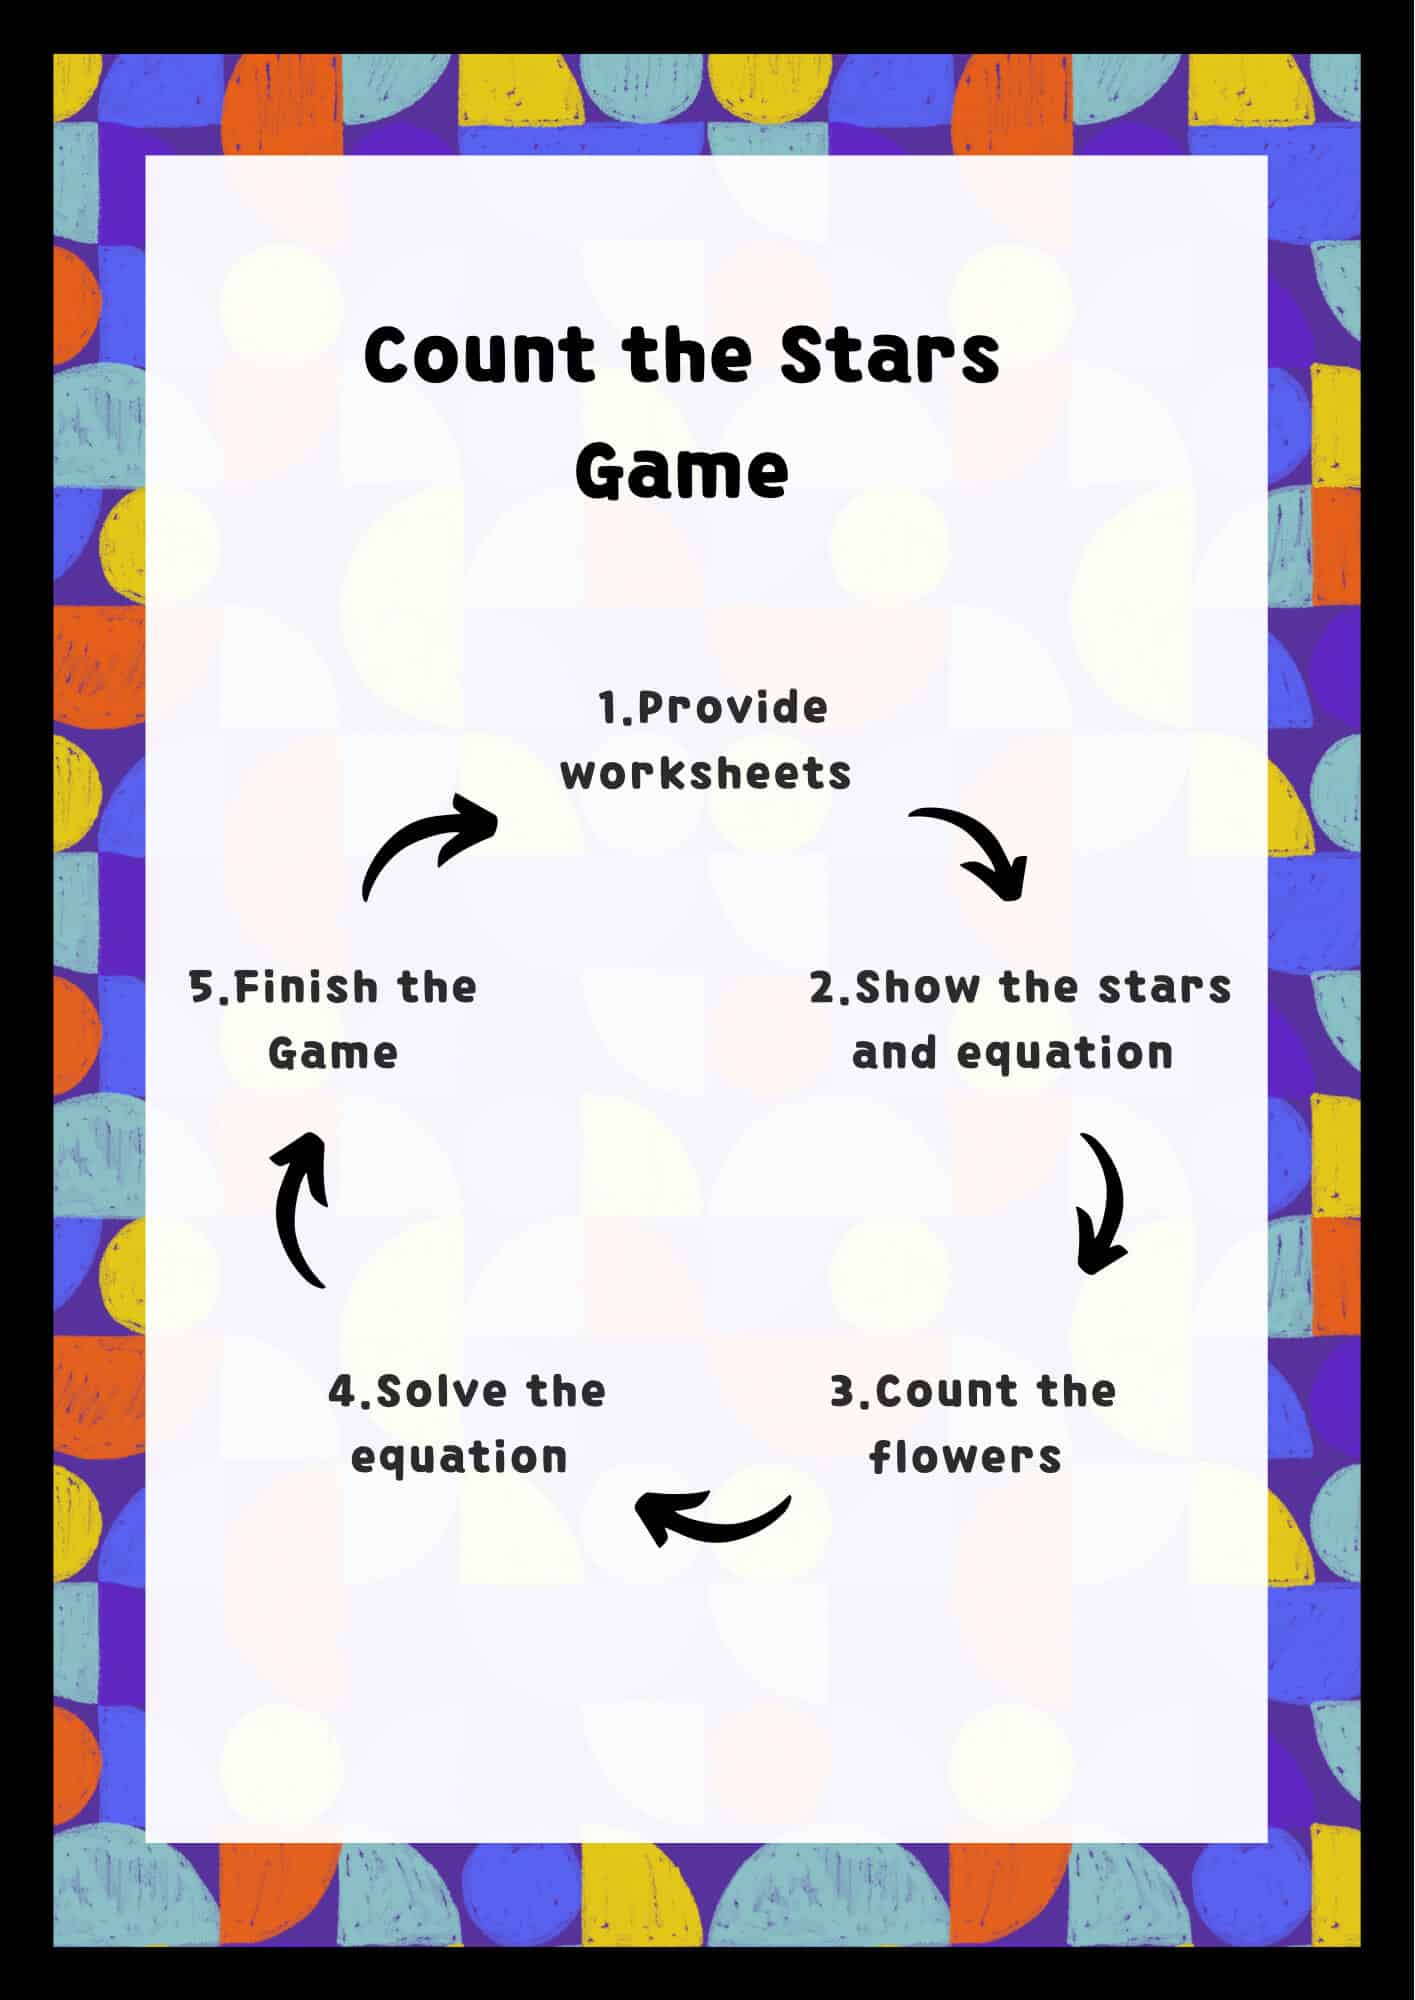 procedure of count the stars game